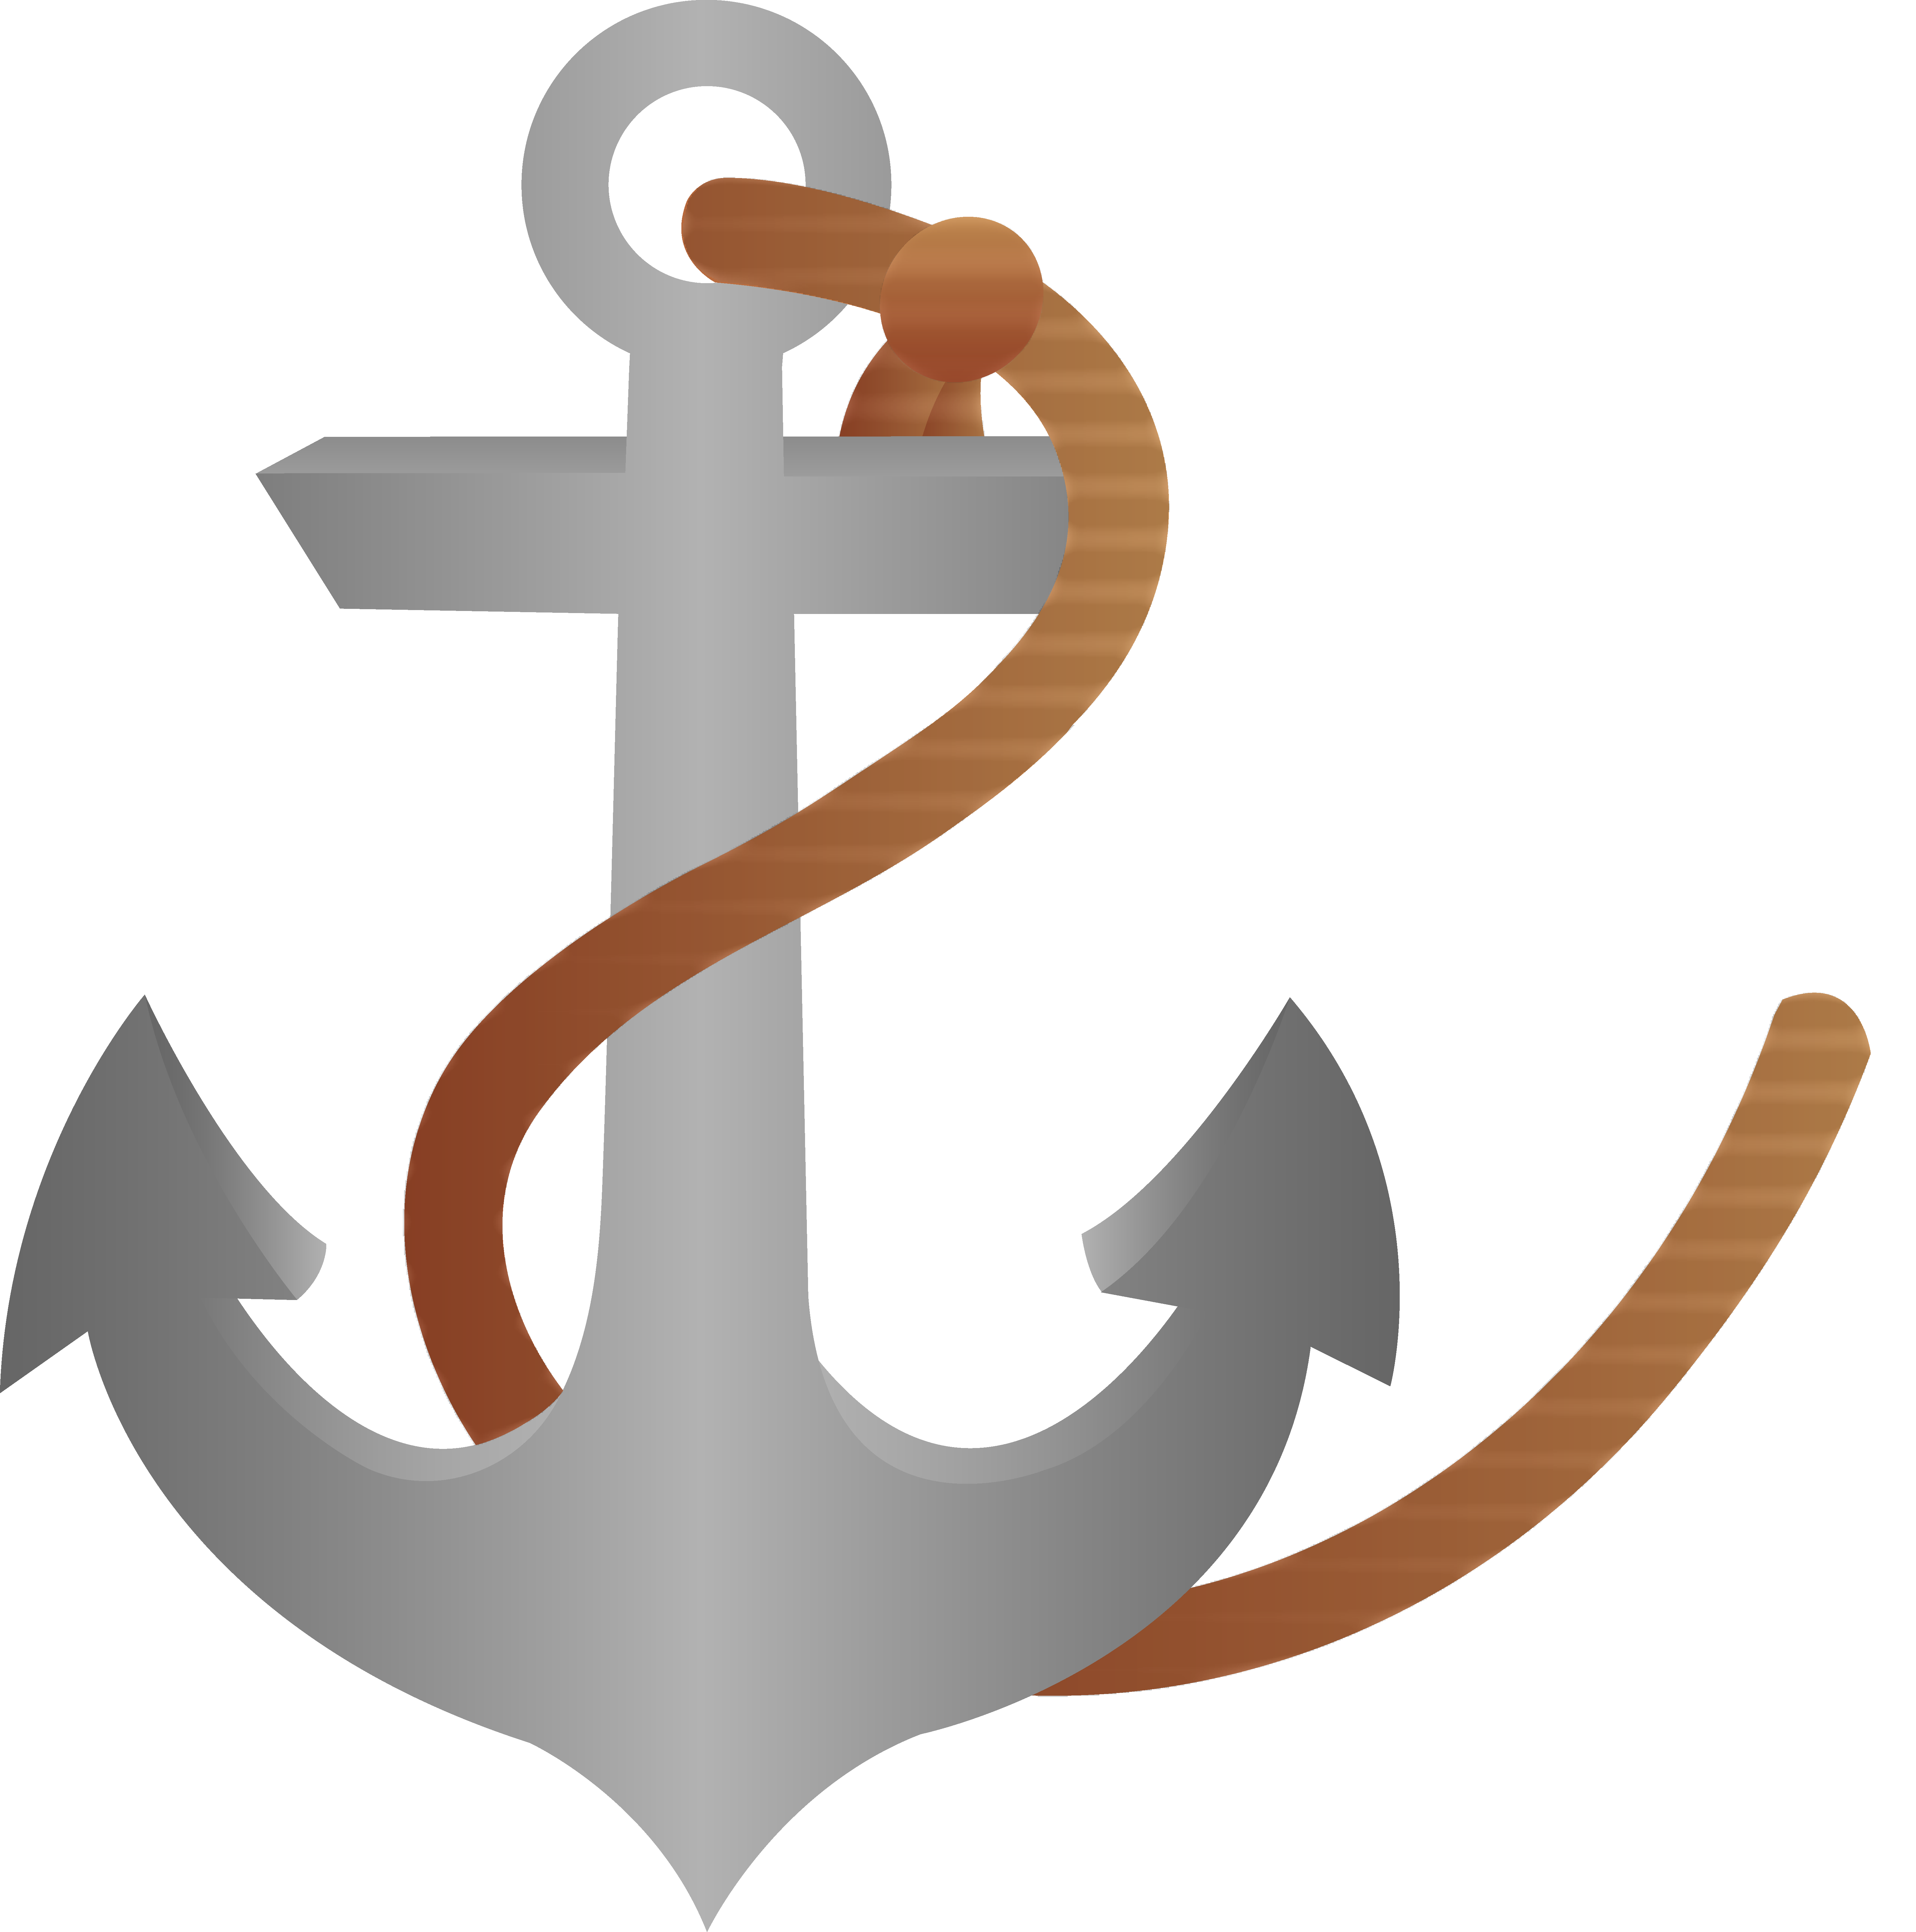 Free Anchor Images, Download Free Anchor Images png images, Free